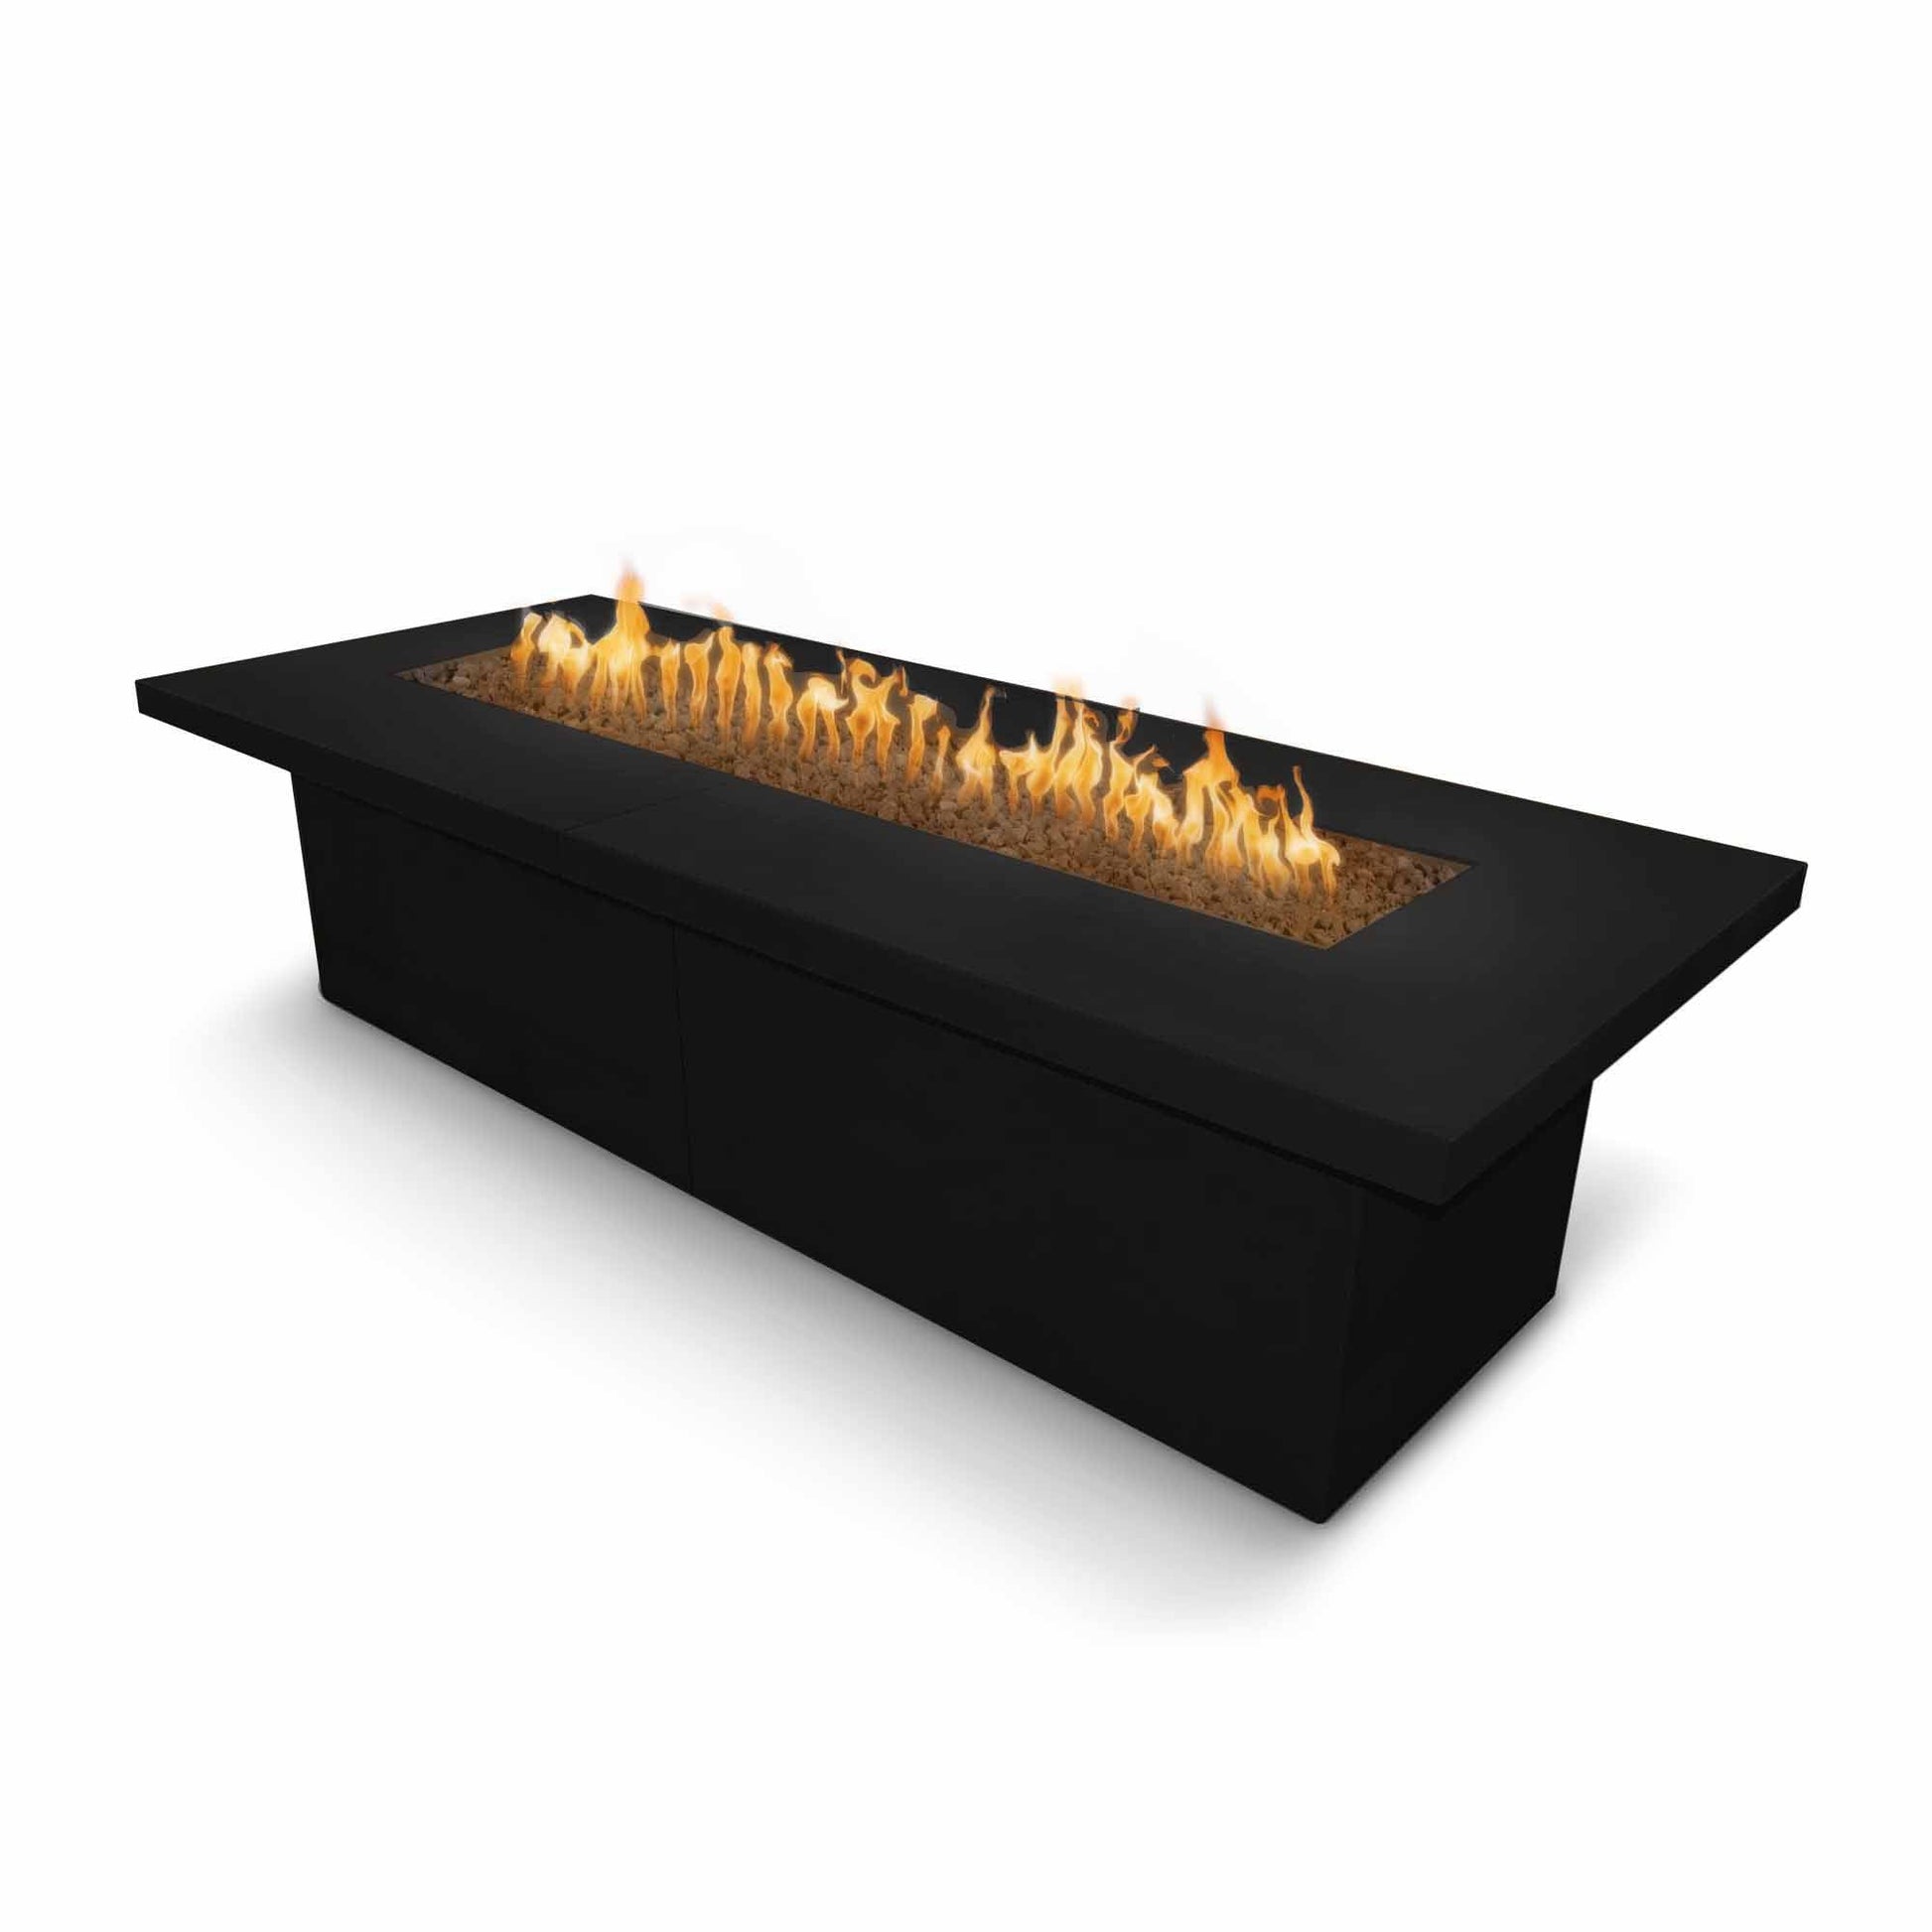 The Outdoor Plus Rectangular Newport 120" Java Powder Coated Metal Liquid Propane Fire Pit with Flame Sense with Spark Ignition